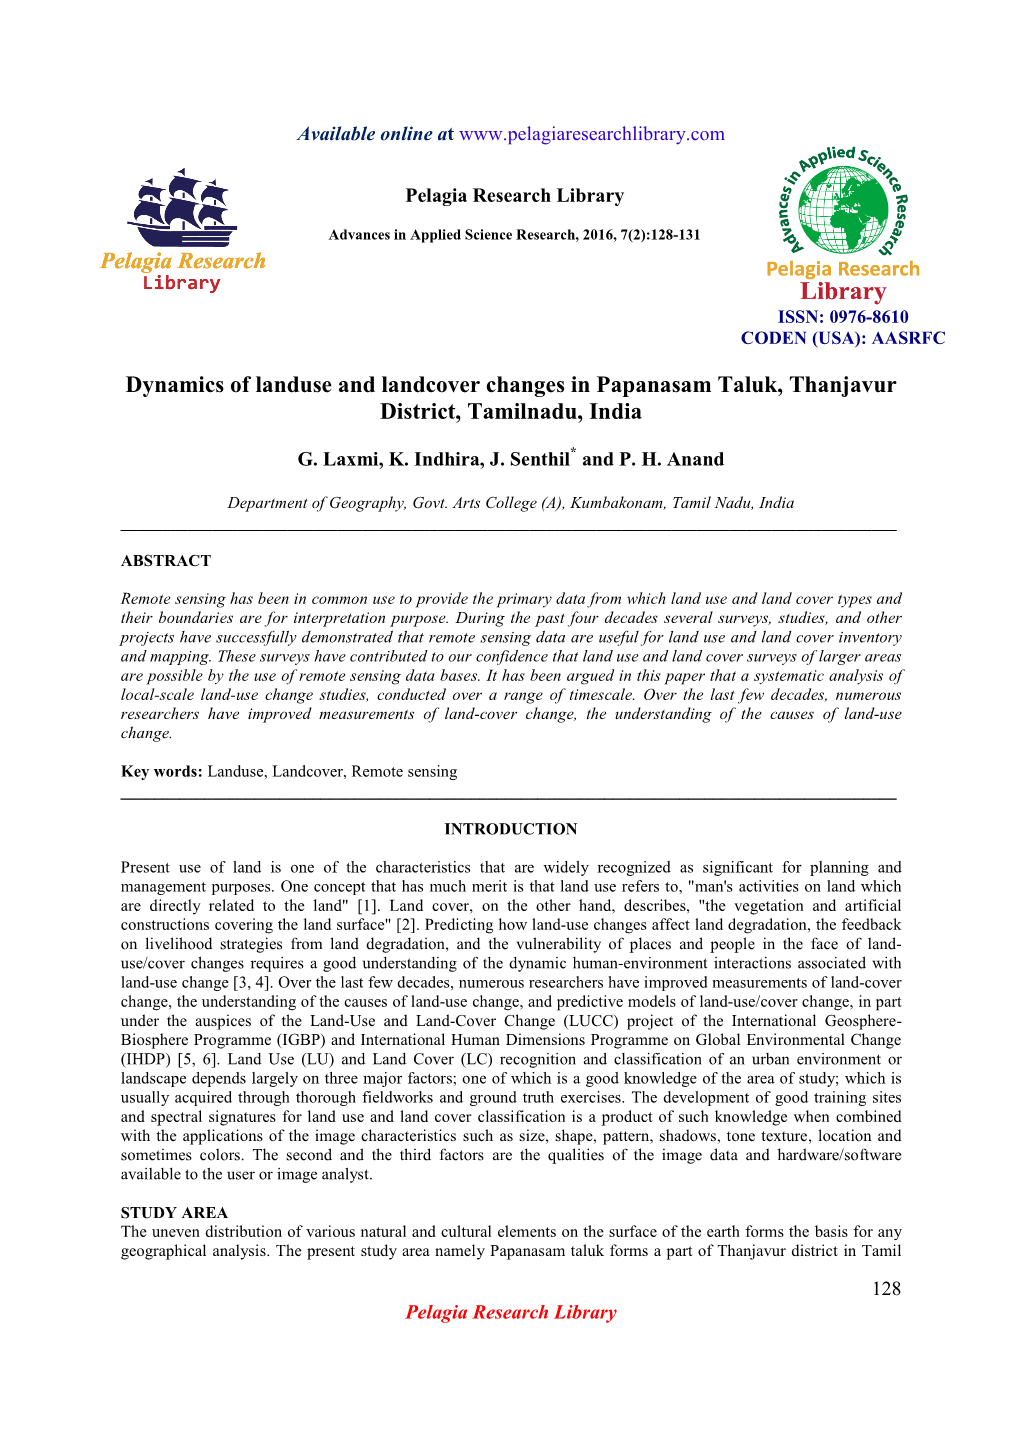 Dynamics of Landuse and Landcover Changes in Papanasam Taluk, Thanjavur District, Tamilnadu, India